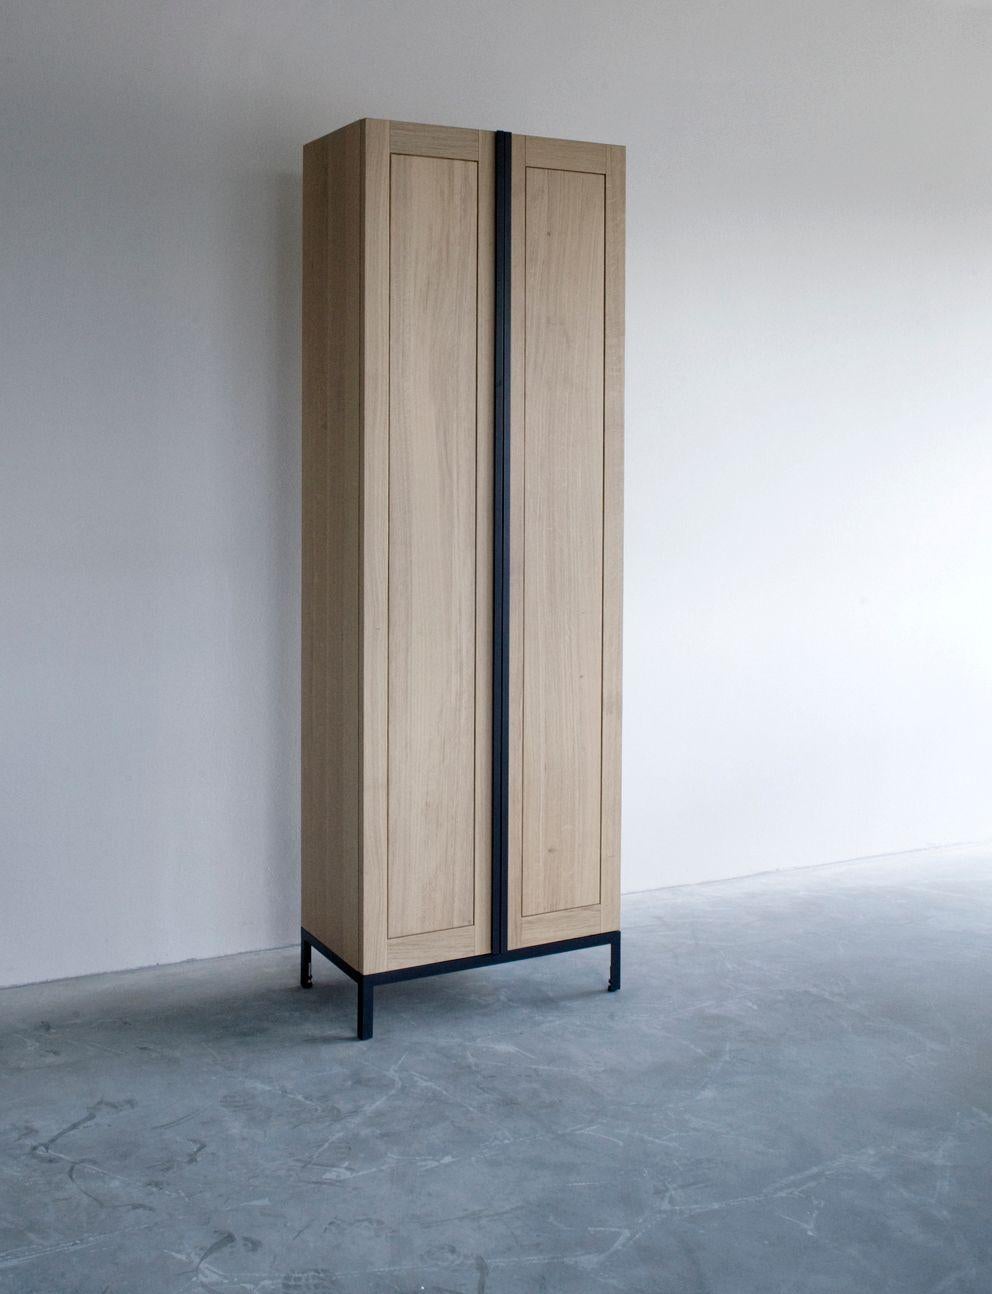 Greep cabinet by Van Rossum.
Dimensions: D76 x W41 x H226 cm
Materials: Oak, steel.

The wood is available in all standard Van Rossum colors, or in a matching finish to customer’s own sample.
The steel frames are protected by a powder coating